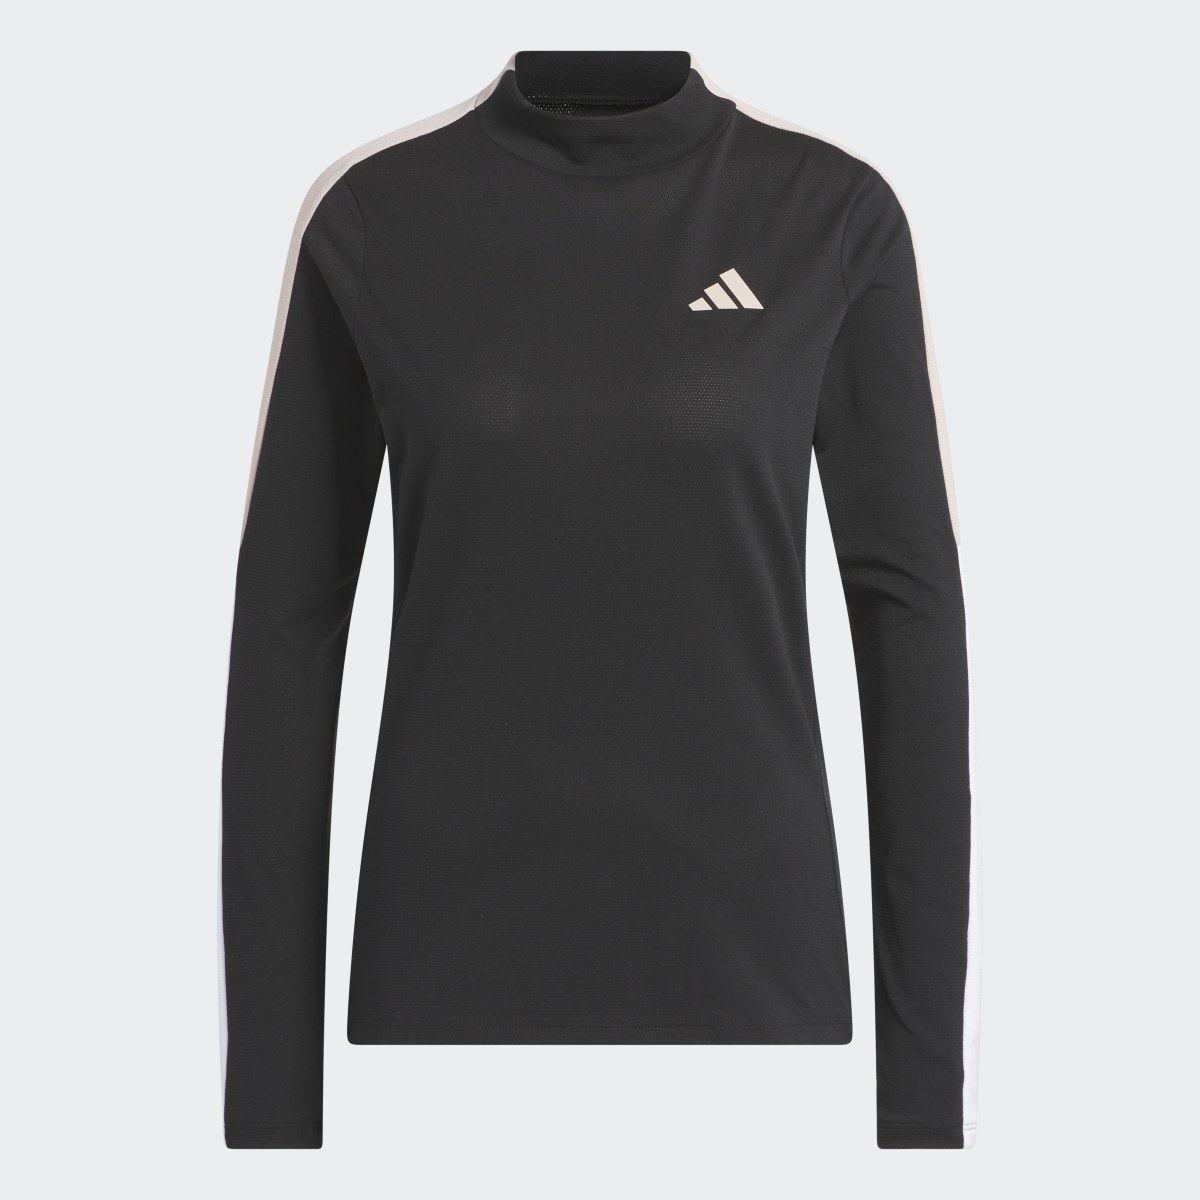 Adidas Made With Nature Mock Neck Tee. 5